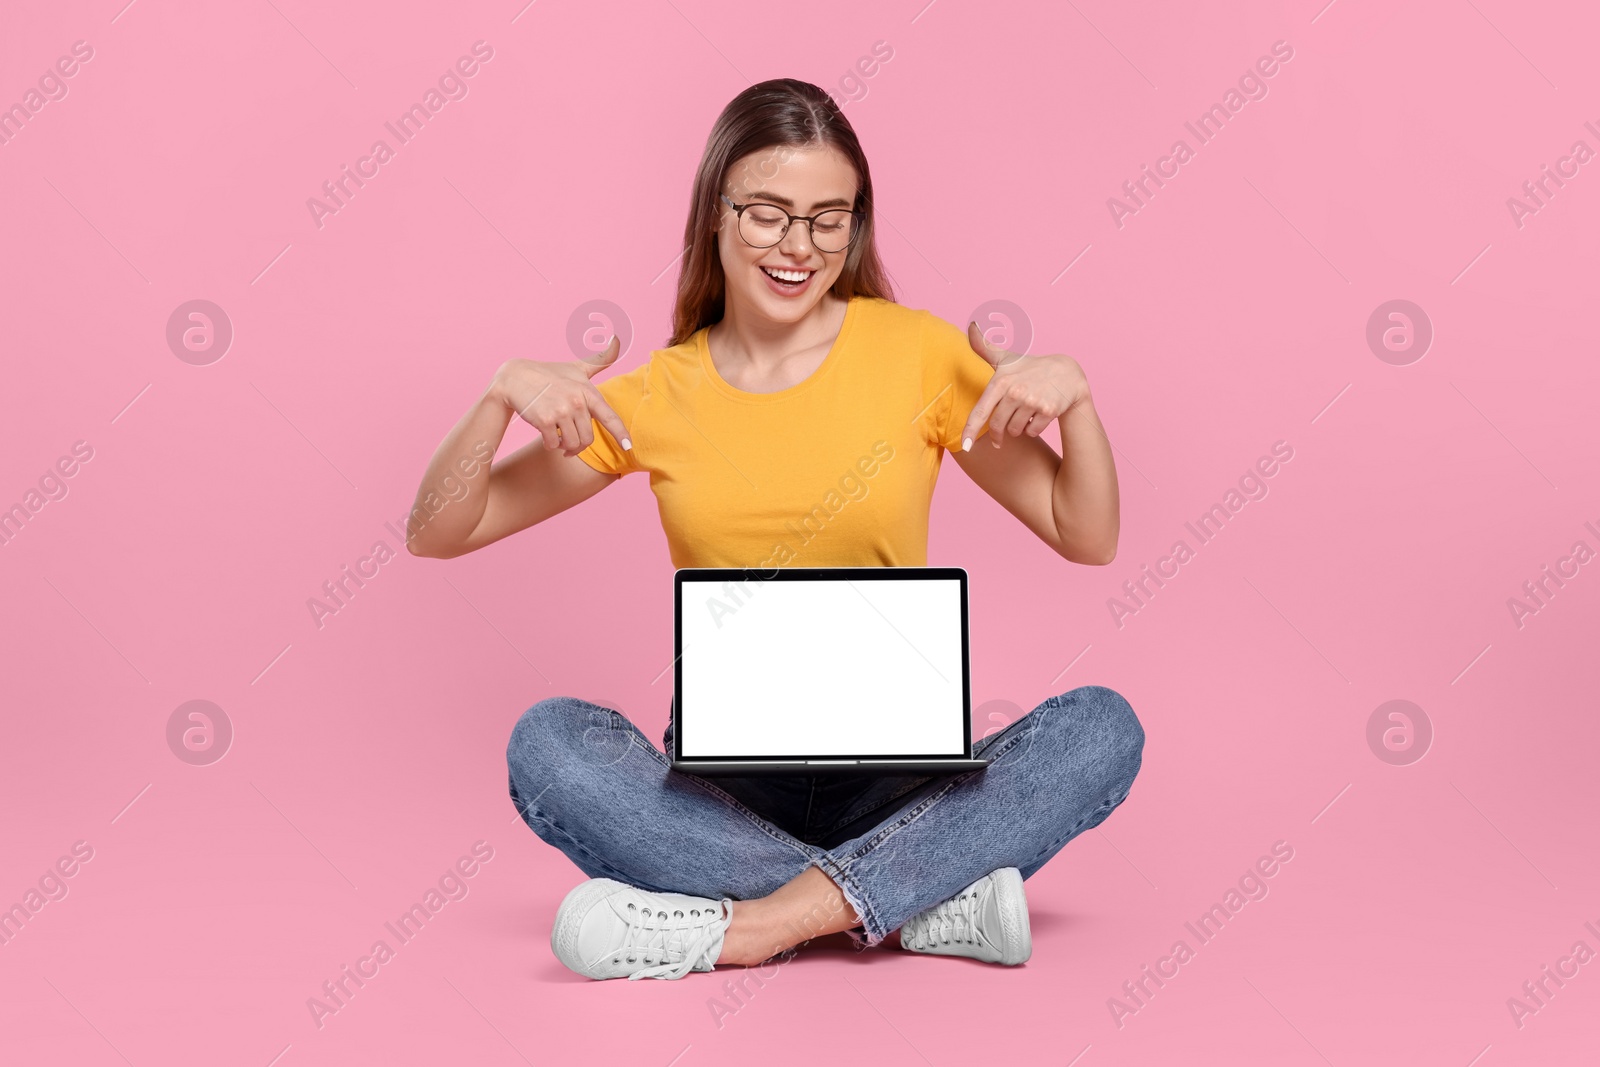 Photo of Happy woman in glasses pointing at laptop on pink background